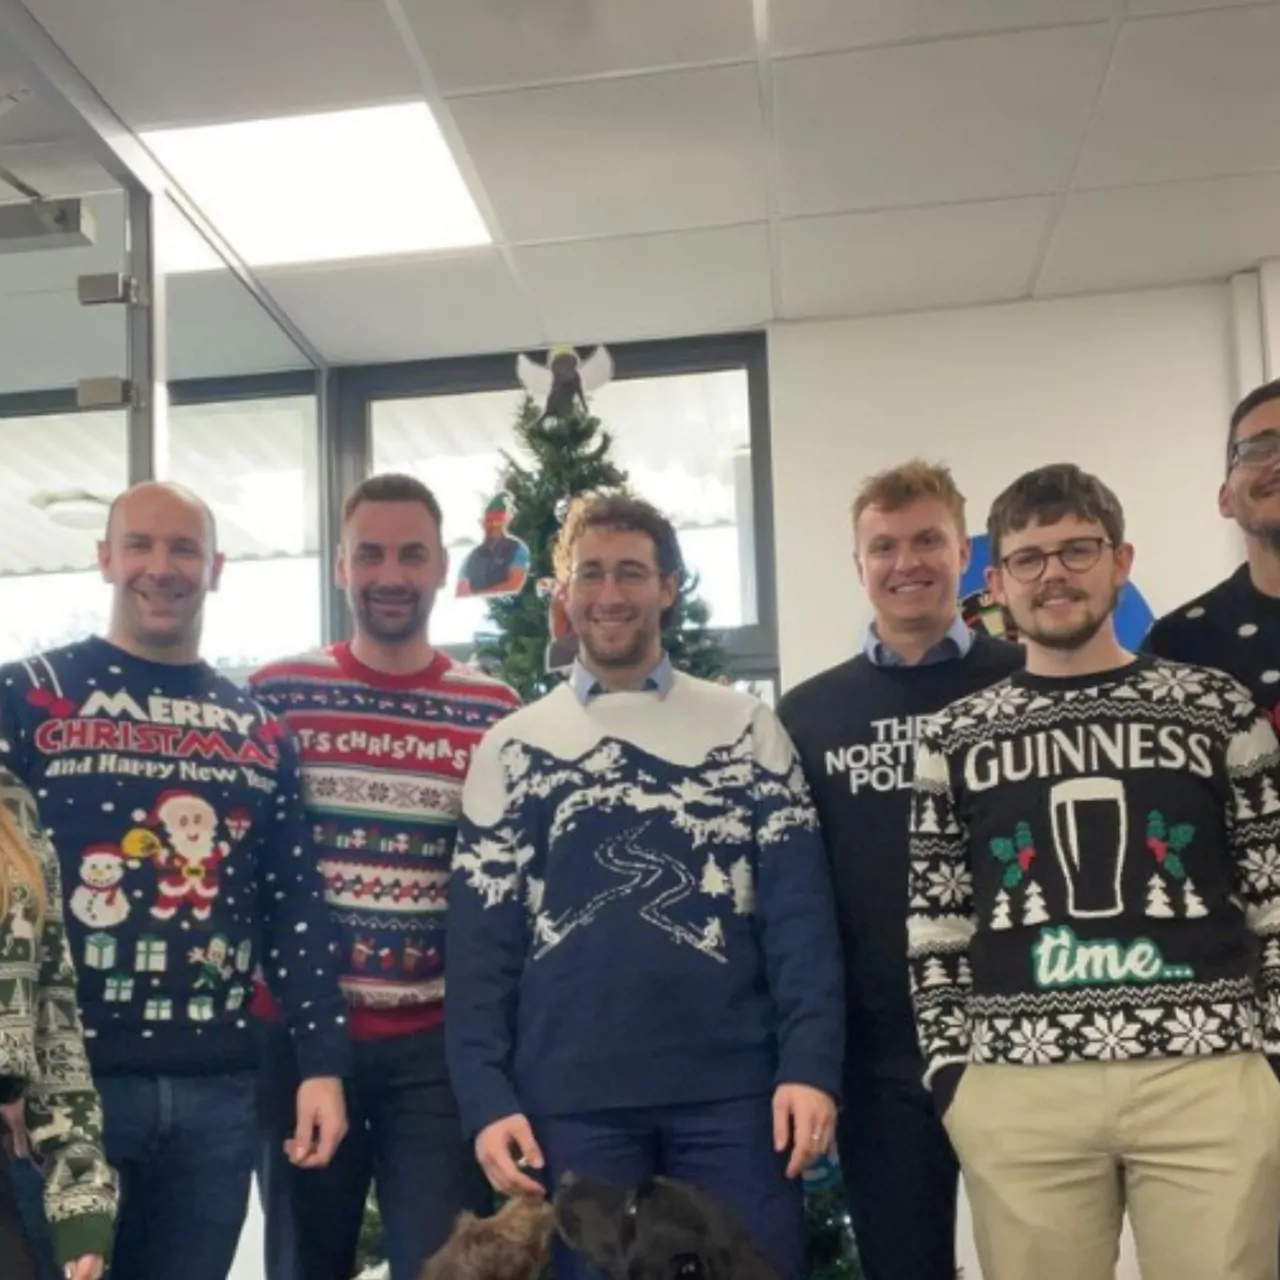 Quad wearing Christmas jumpers